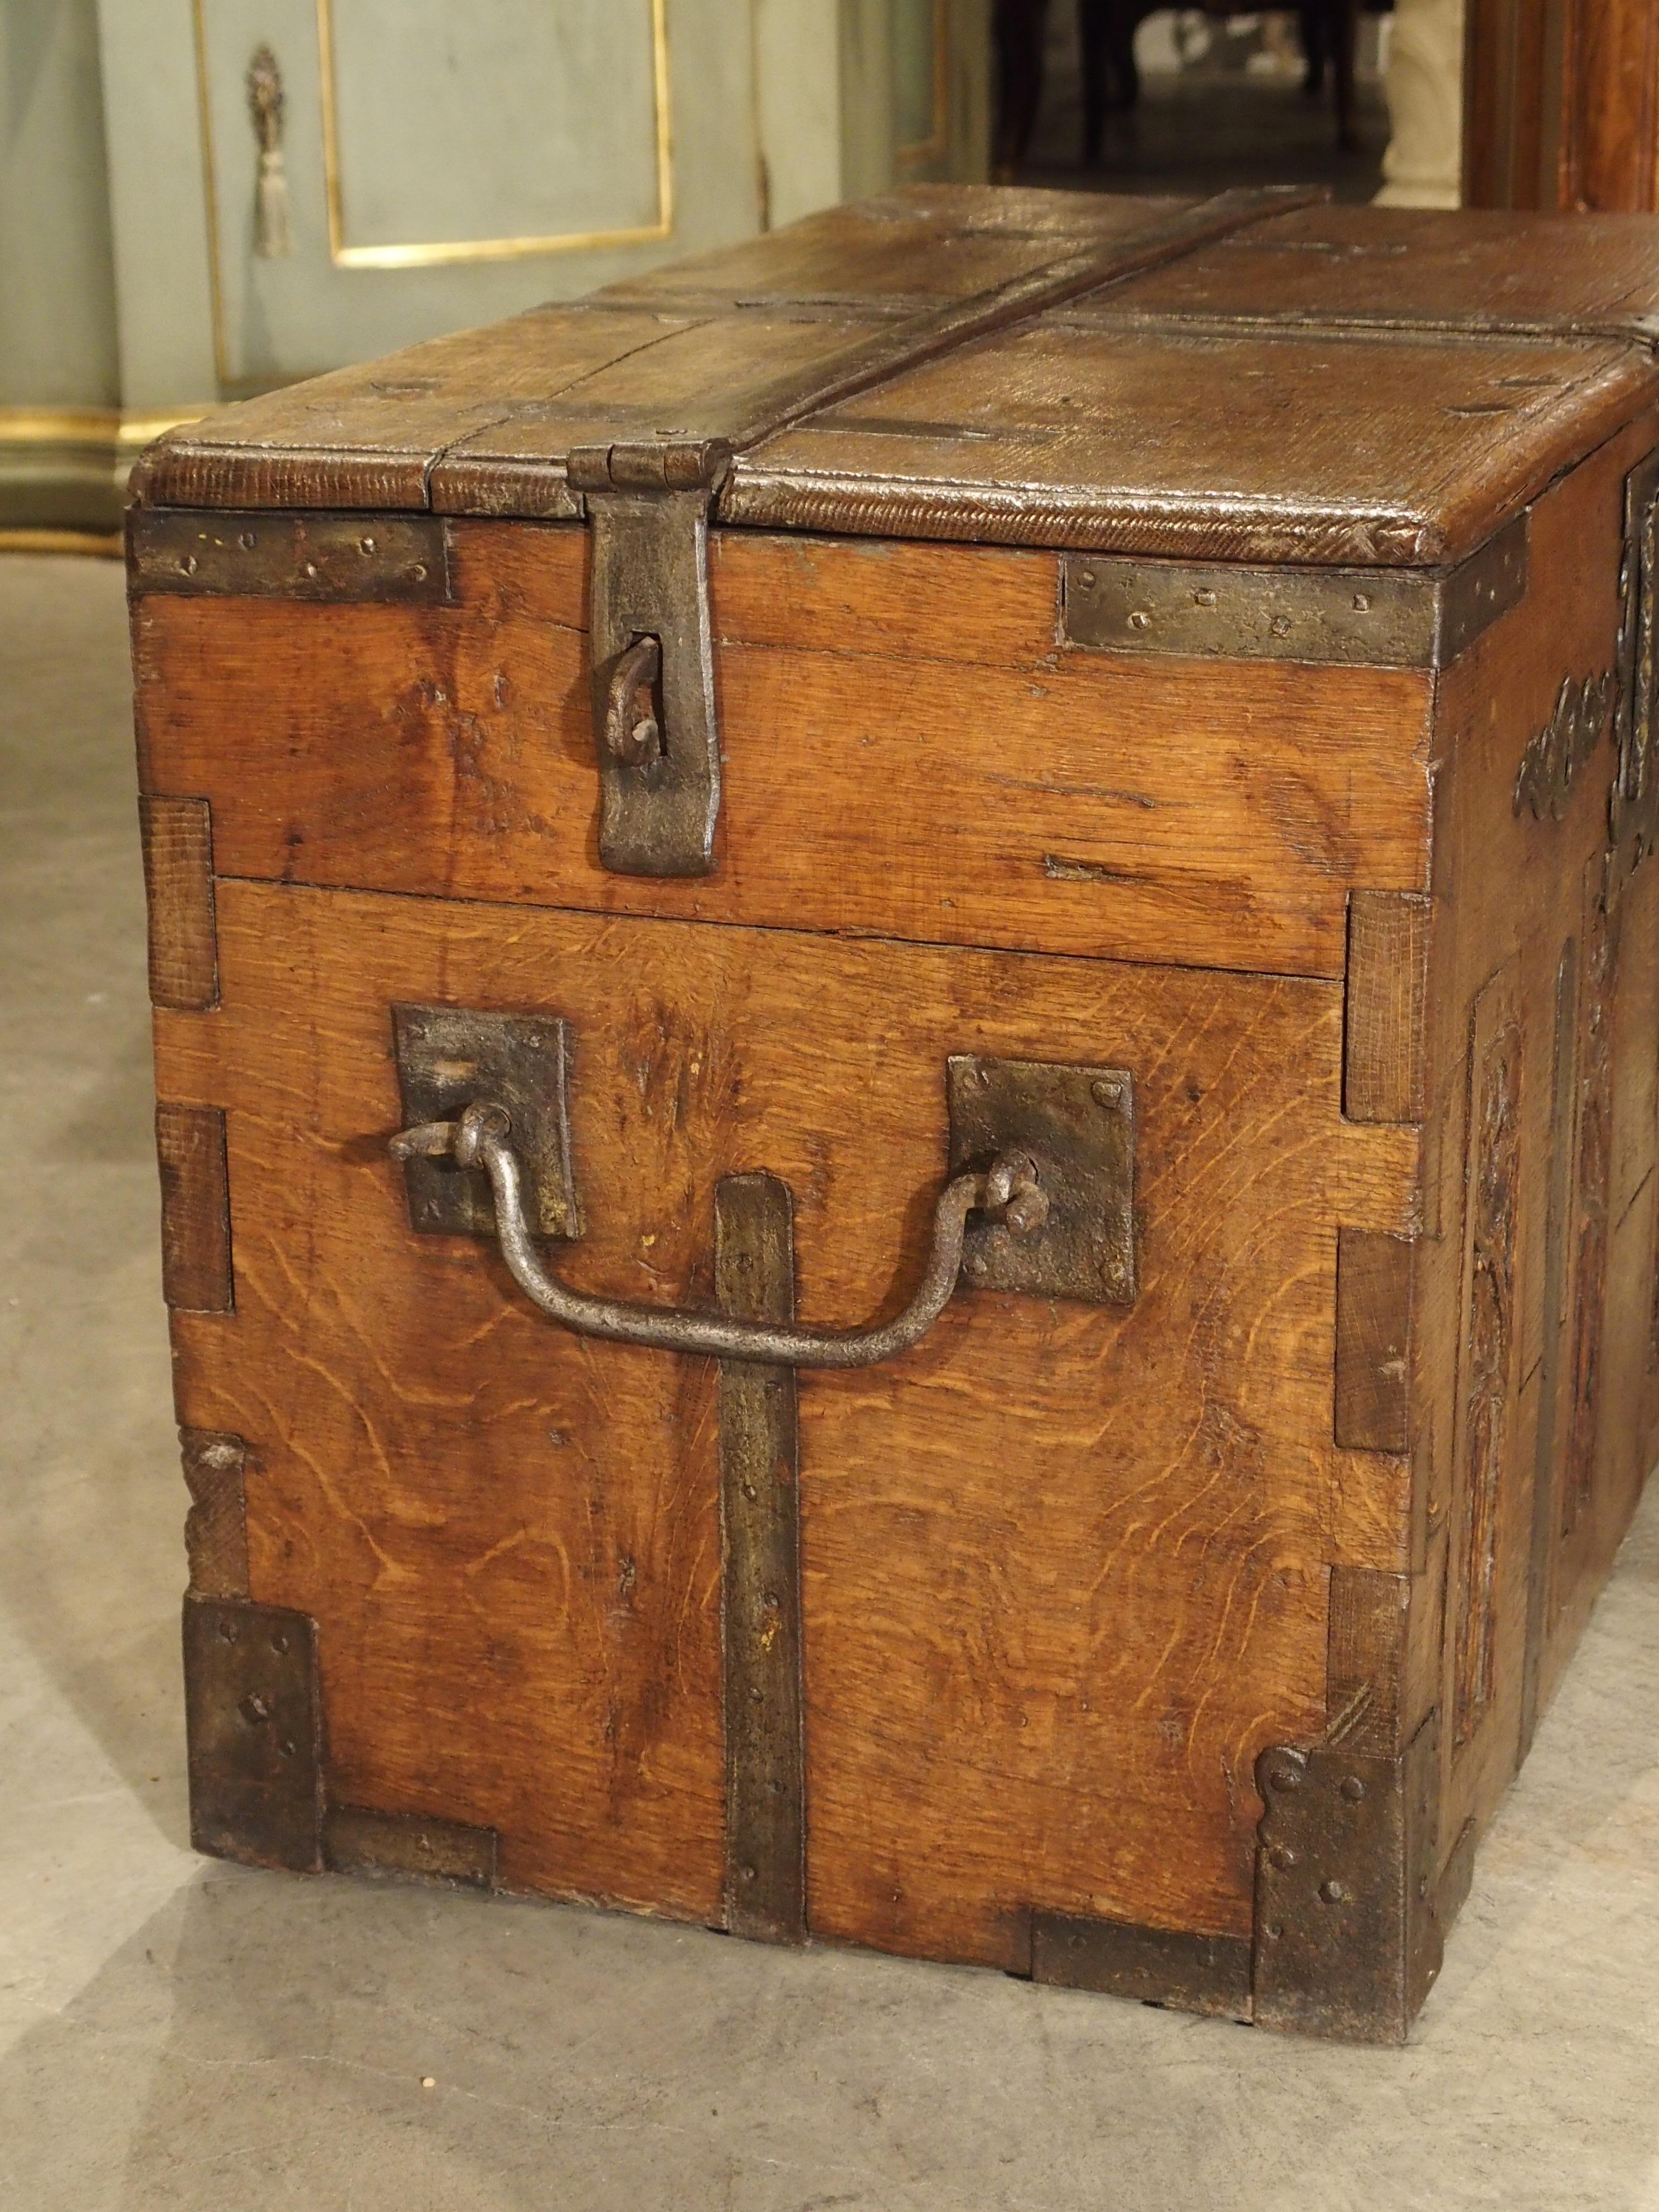 This iron bound, antique oak trunk from the 1700s has four inset panels at the front with Gothic ornamentation. The trunk must have held very important valuables at one time, as there are three locks on the front panel and the ability to pad lock